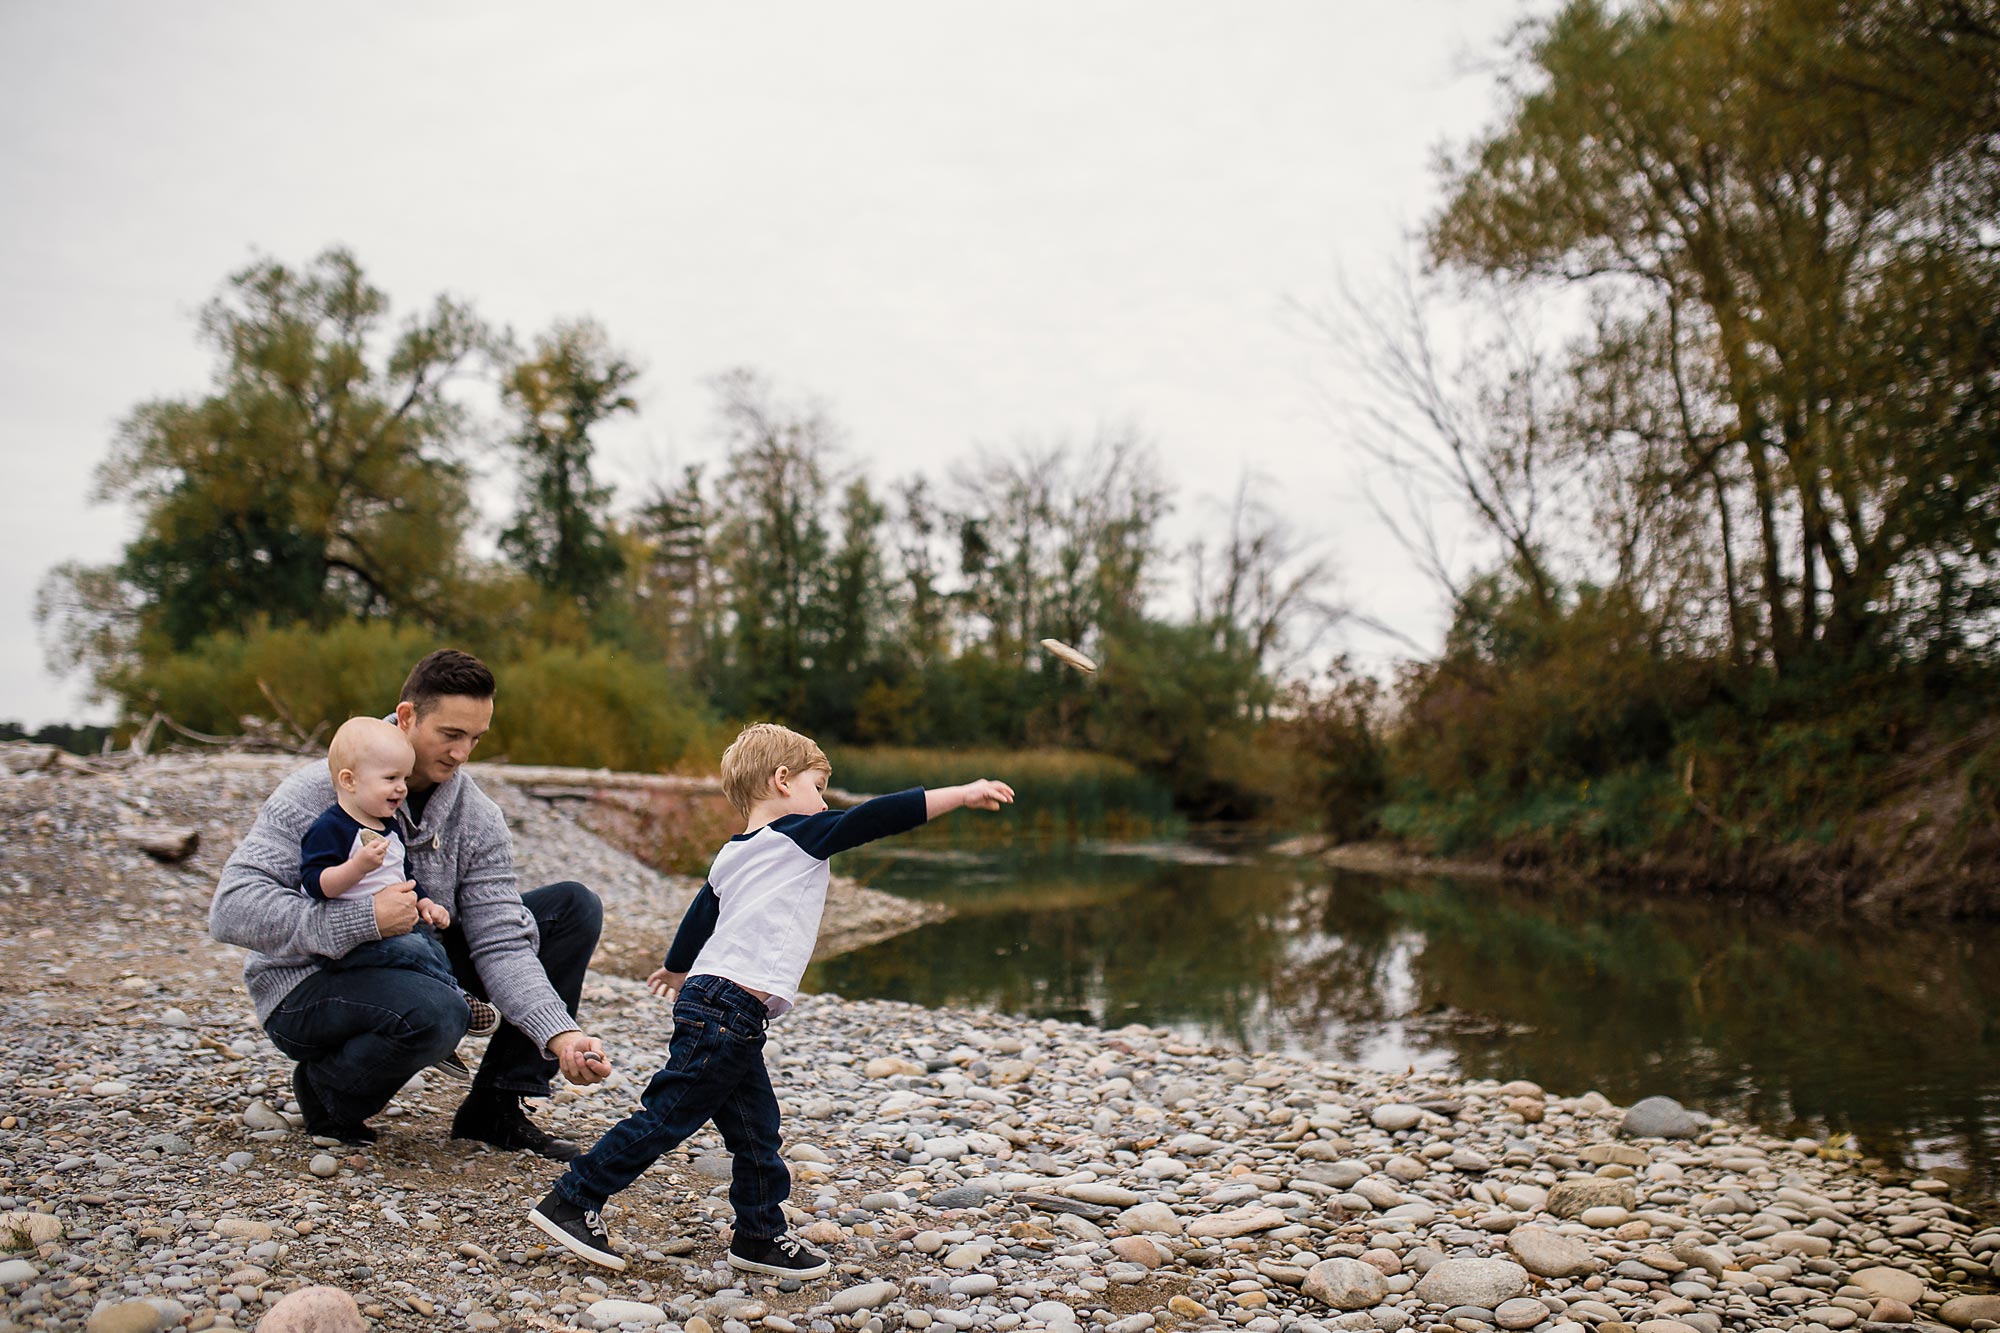 brothers throwing rocks in pond with dad